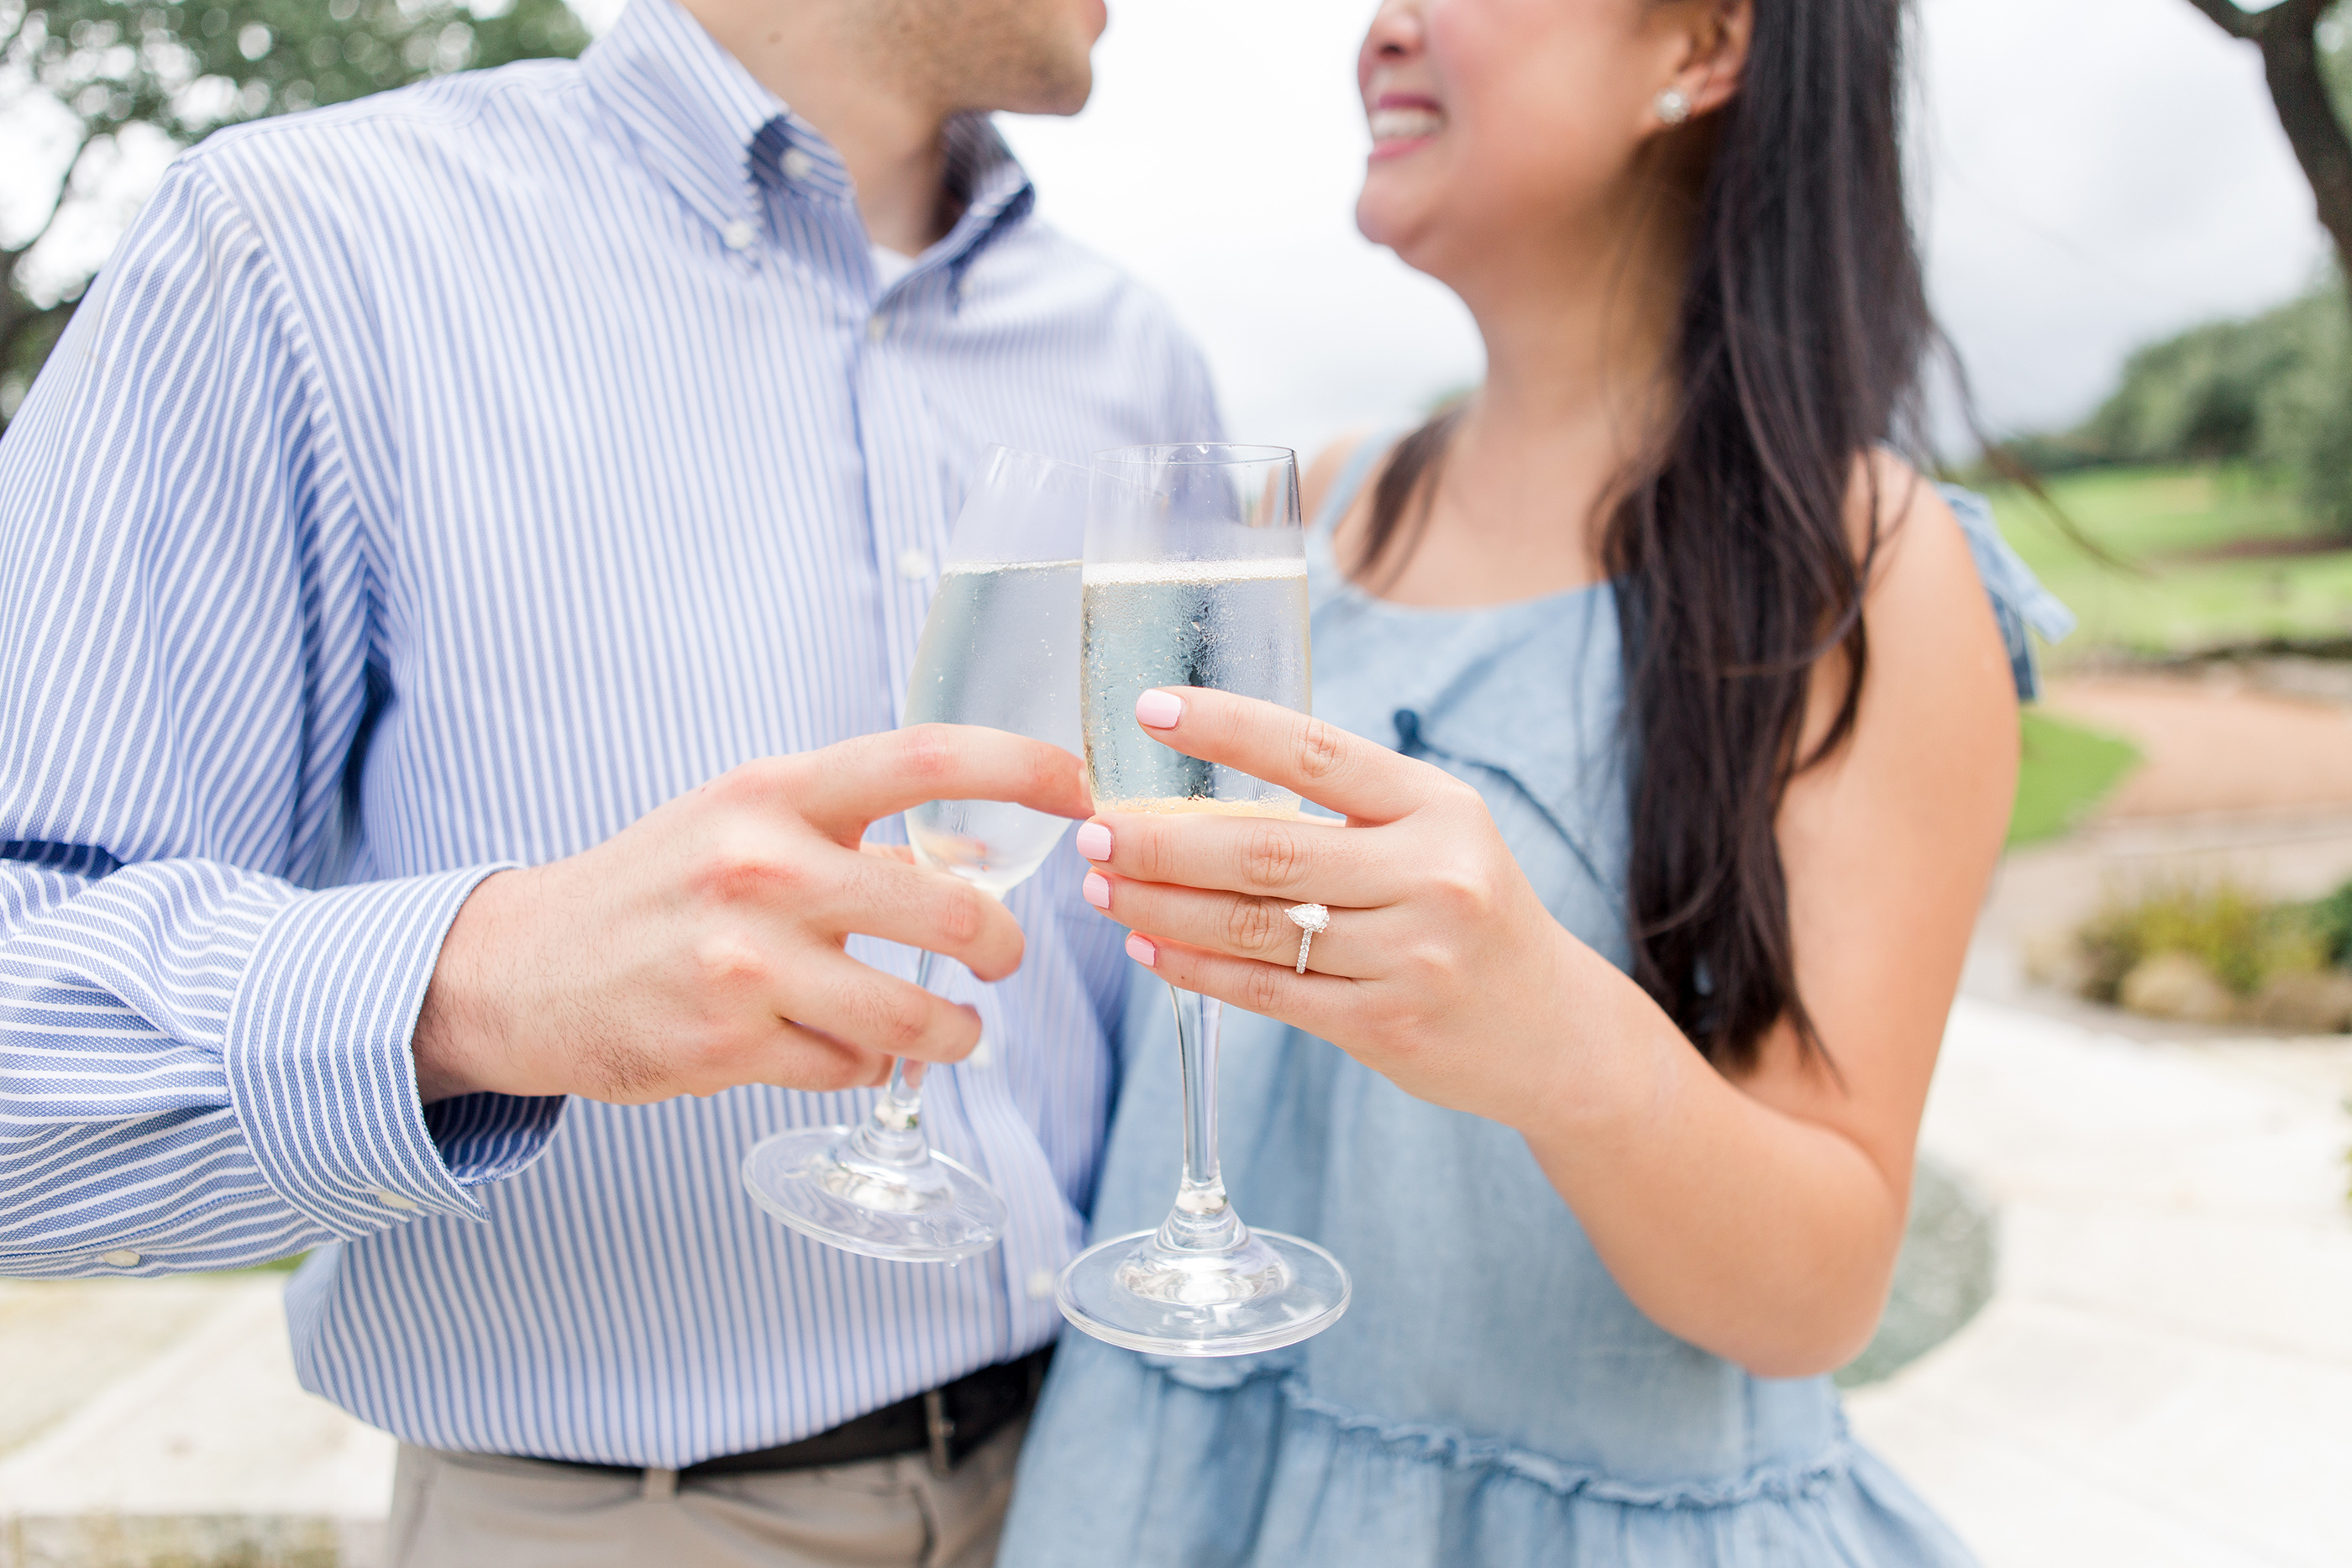 What are some of the best matchmaking services in austin?